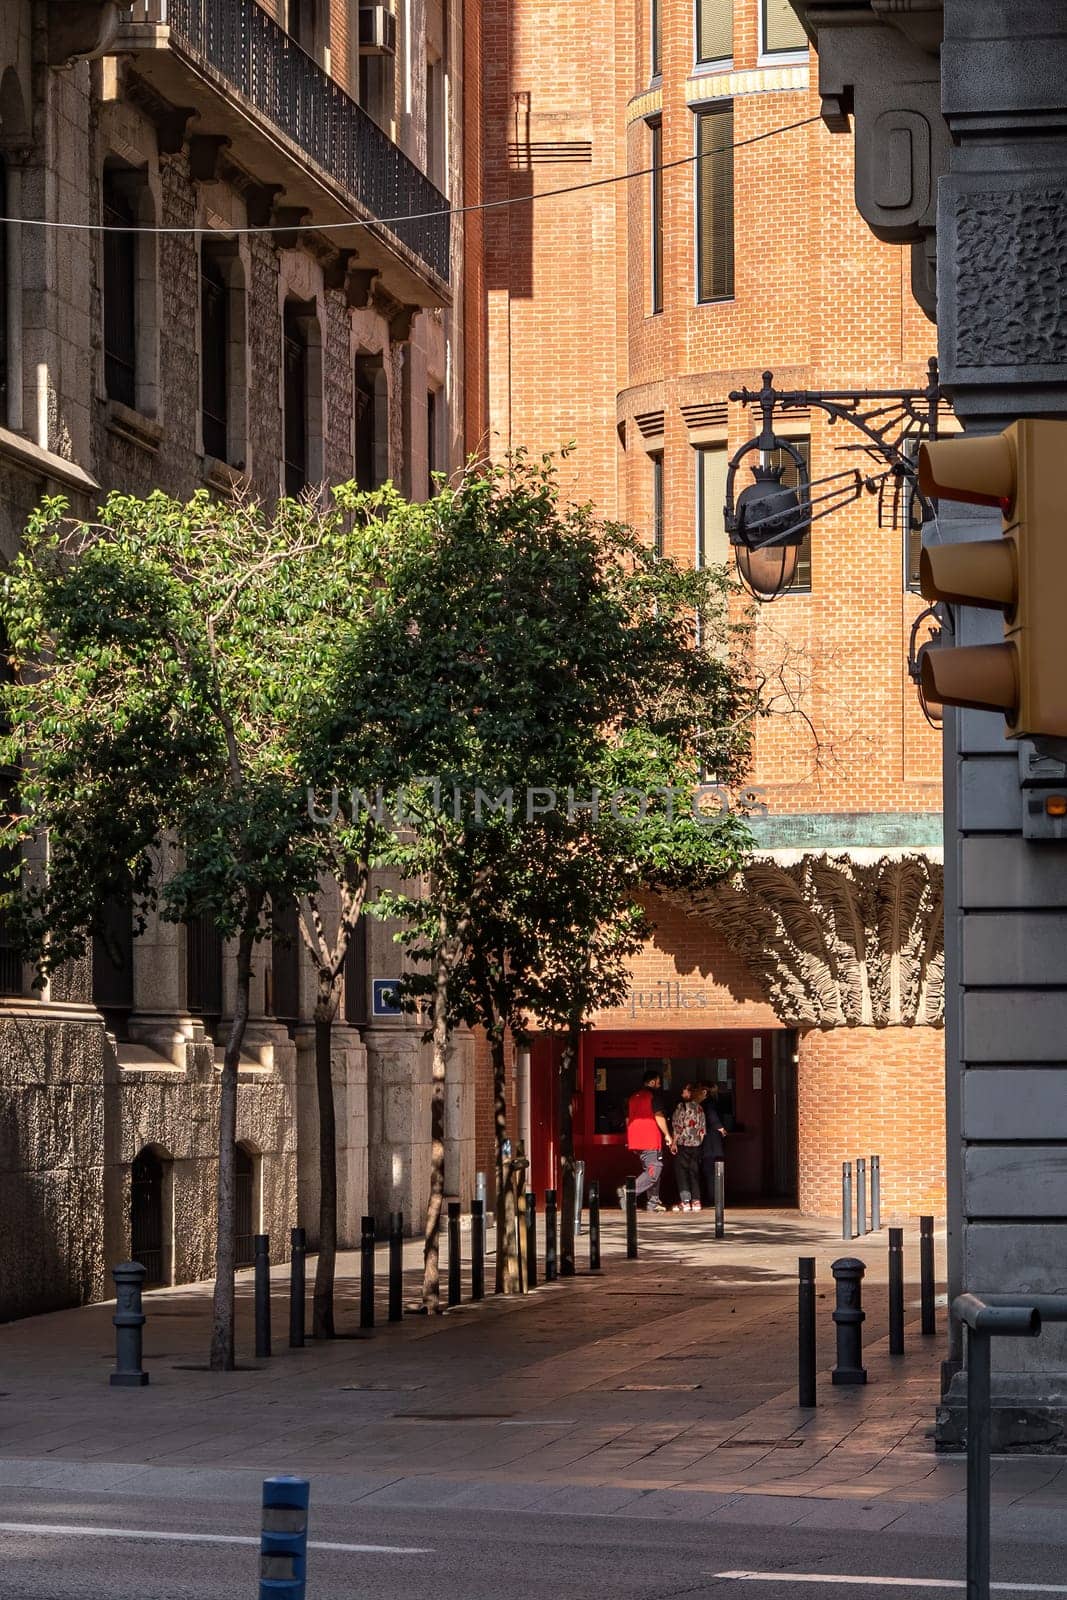 Streets of Barcelona. A view from street Via Laietana to a street with buildings, trees and box office.